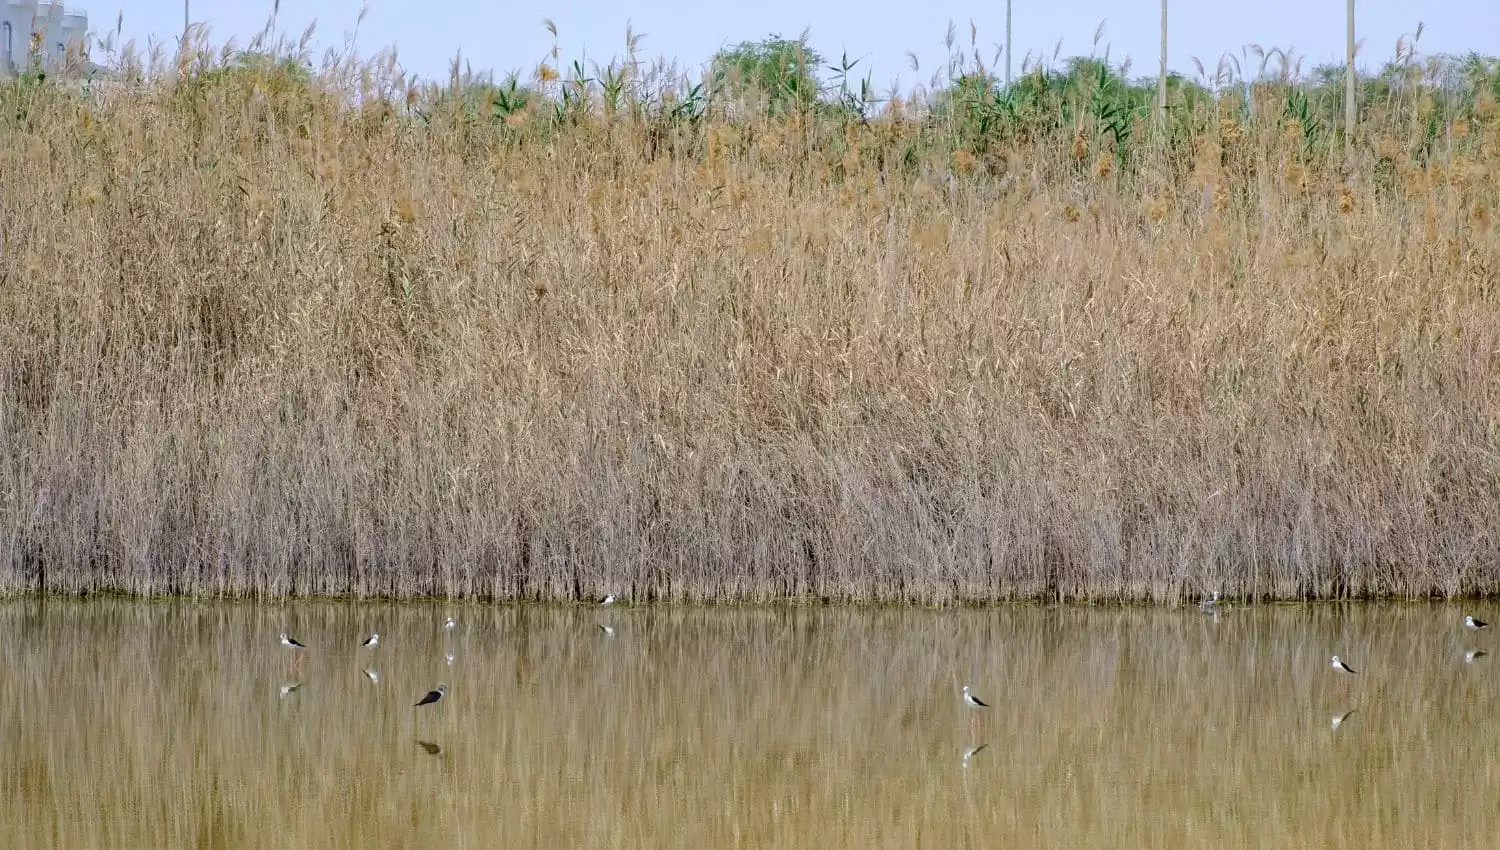 Al Wathba Water Reserve and its birds